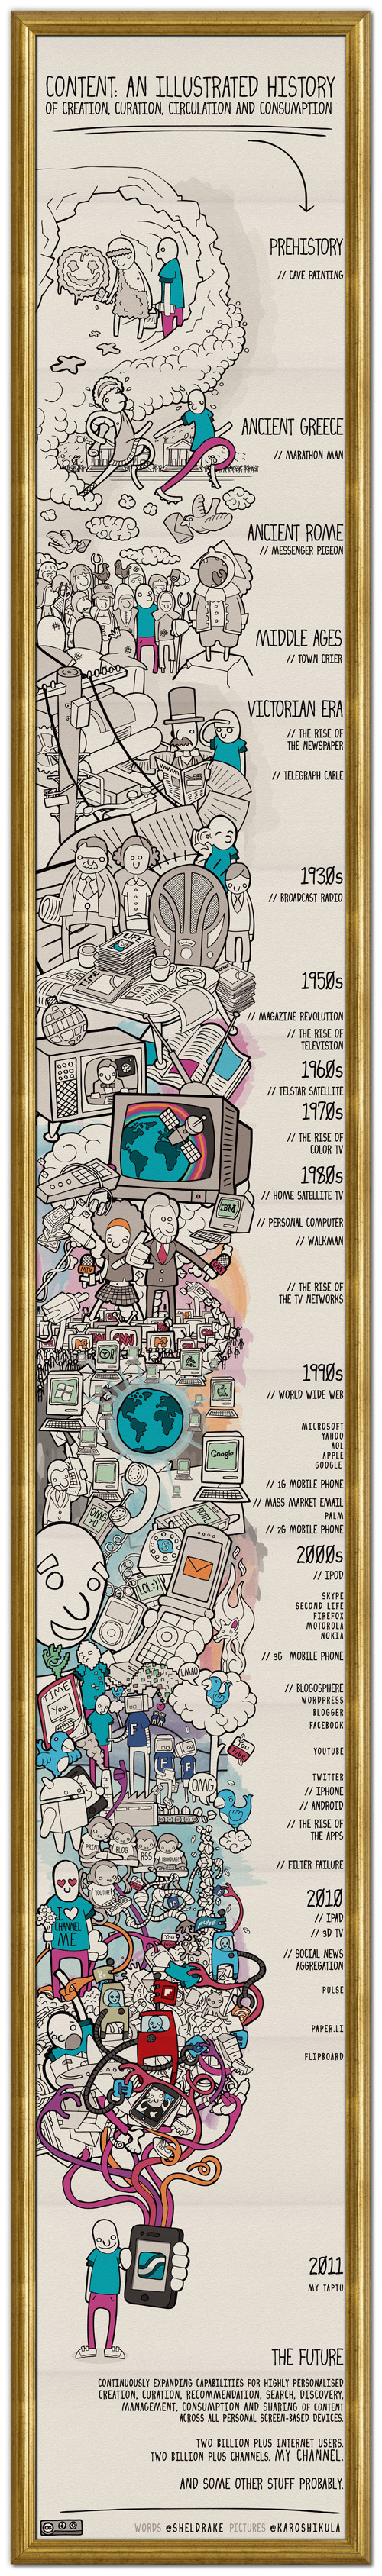 An Illustrated Evolution Of Media Content (Infographic) 2